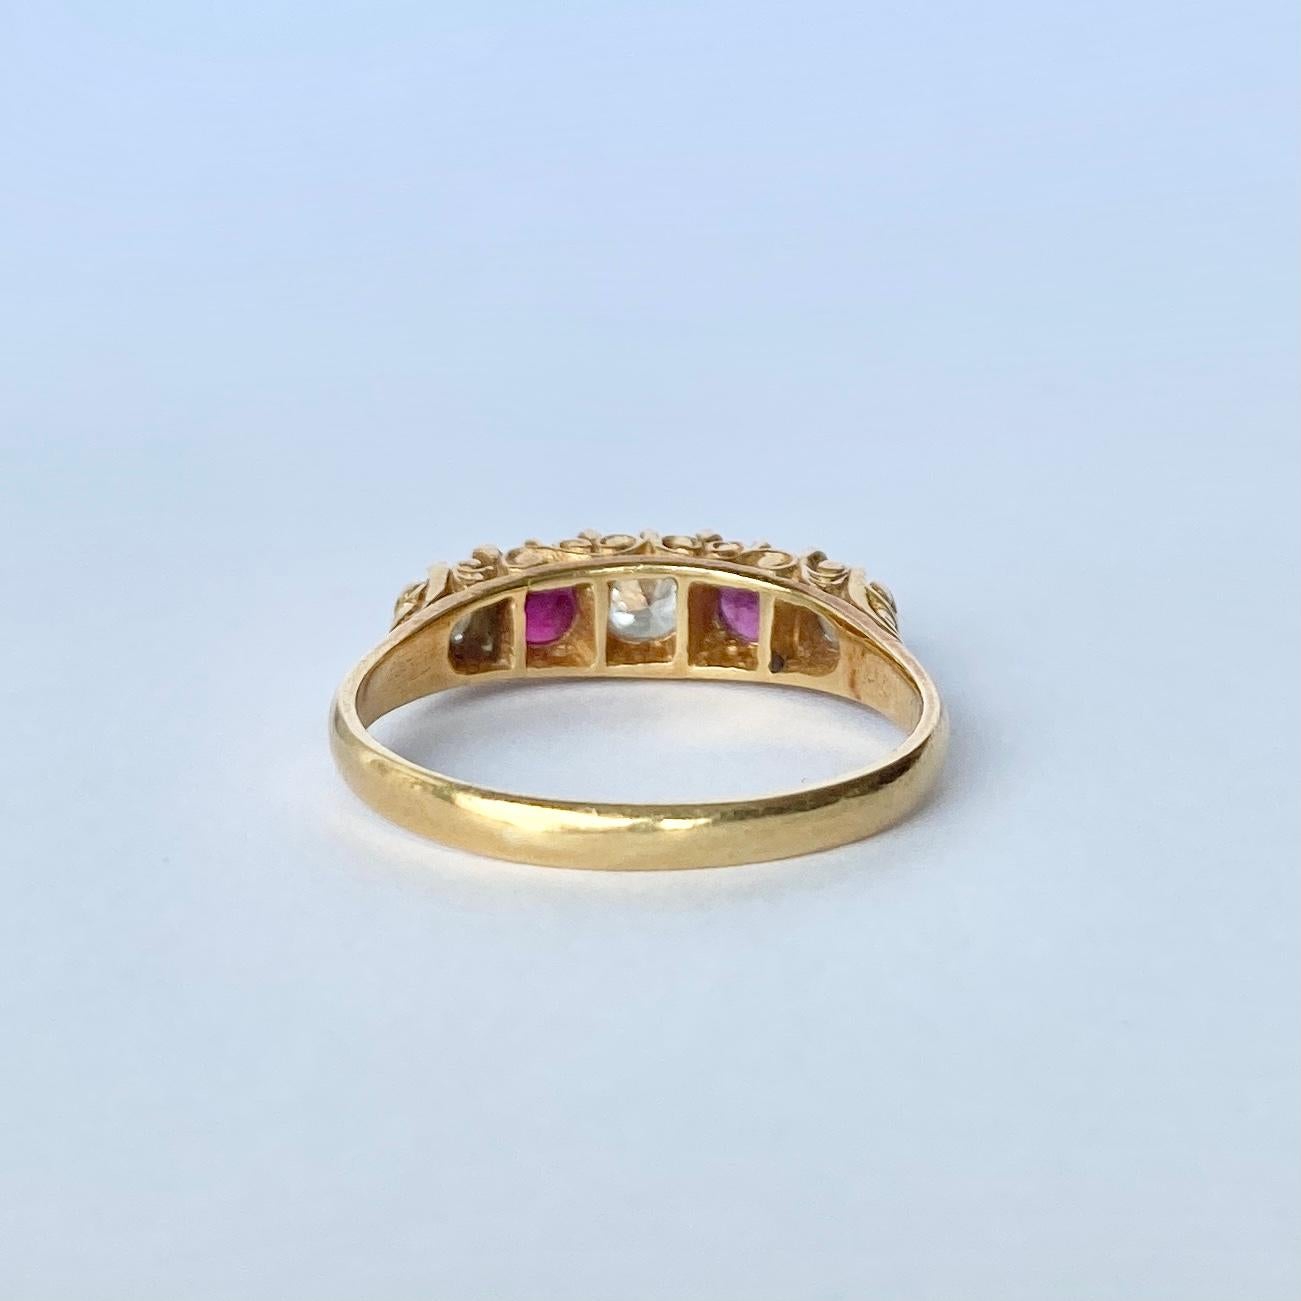 Set in this glossy 18ct gold ring are three Diamonds and two Rubies. The three diamonds total 45pts and the rubies total 30pts. The stones are set in simple claw settings and sit quite flush within the ornate band. Hallmarked London 1976.

Ring